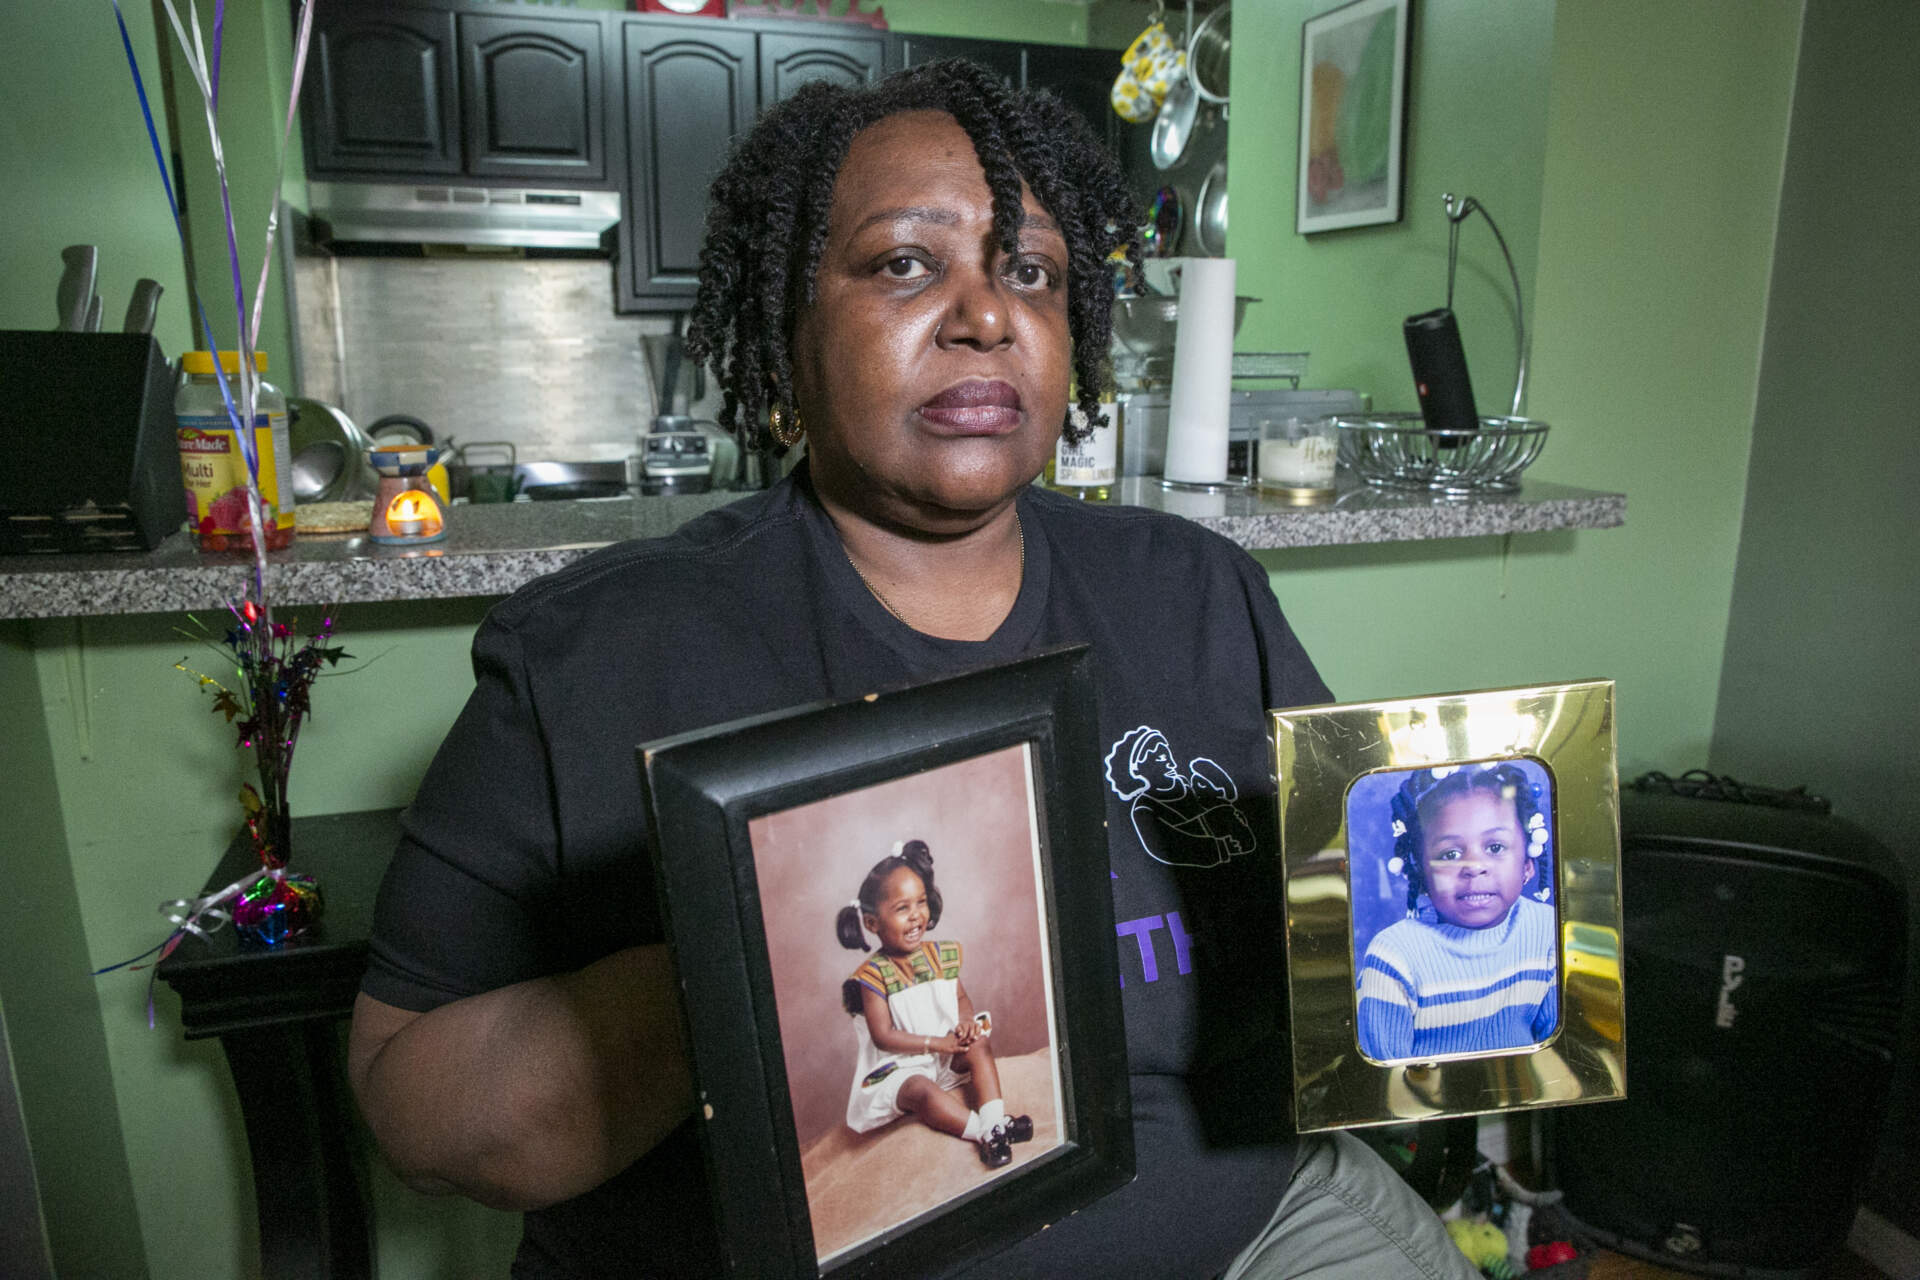 Joyce McMillan shows pictures of her children at her home in the Harlem neighborhood of New York City on Monday, May 15, 2023. (Ted Shaffrey/AP)